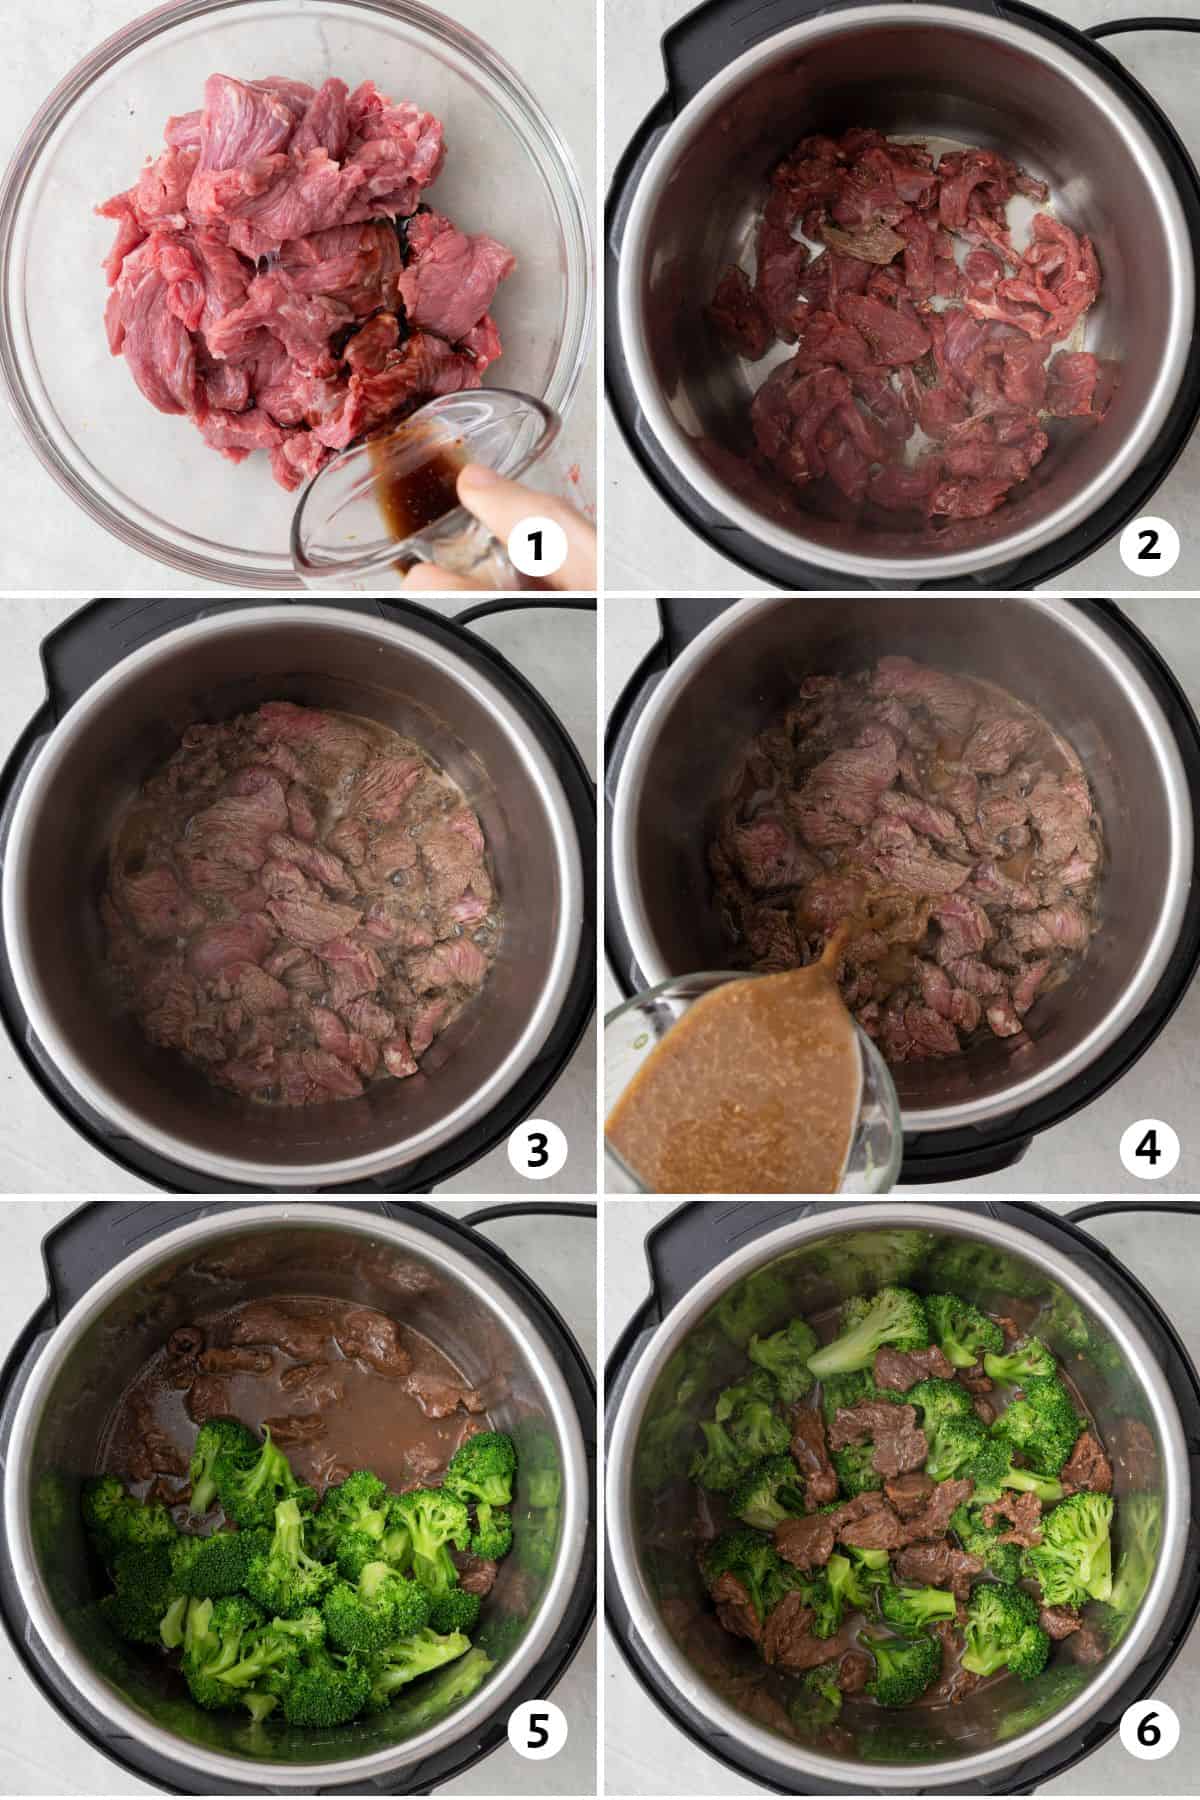 6 image collage making recipe in instant pot: 1- marinade being poured over uncooked beef cubes in bowl, 2- beef added to instant pot, 3- beef after mostly cooked, 4- sauce poured over, 5- cooked broccoli added, and 5- beef and broccoli combined.